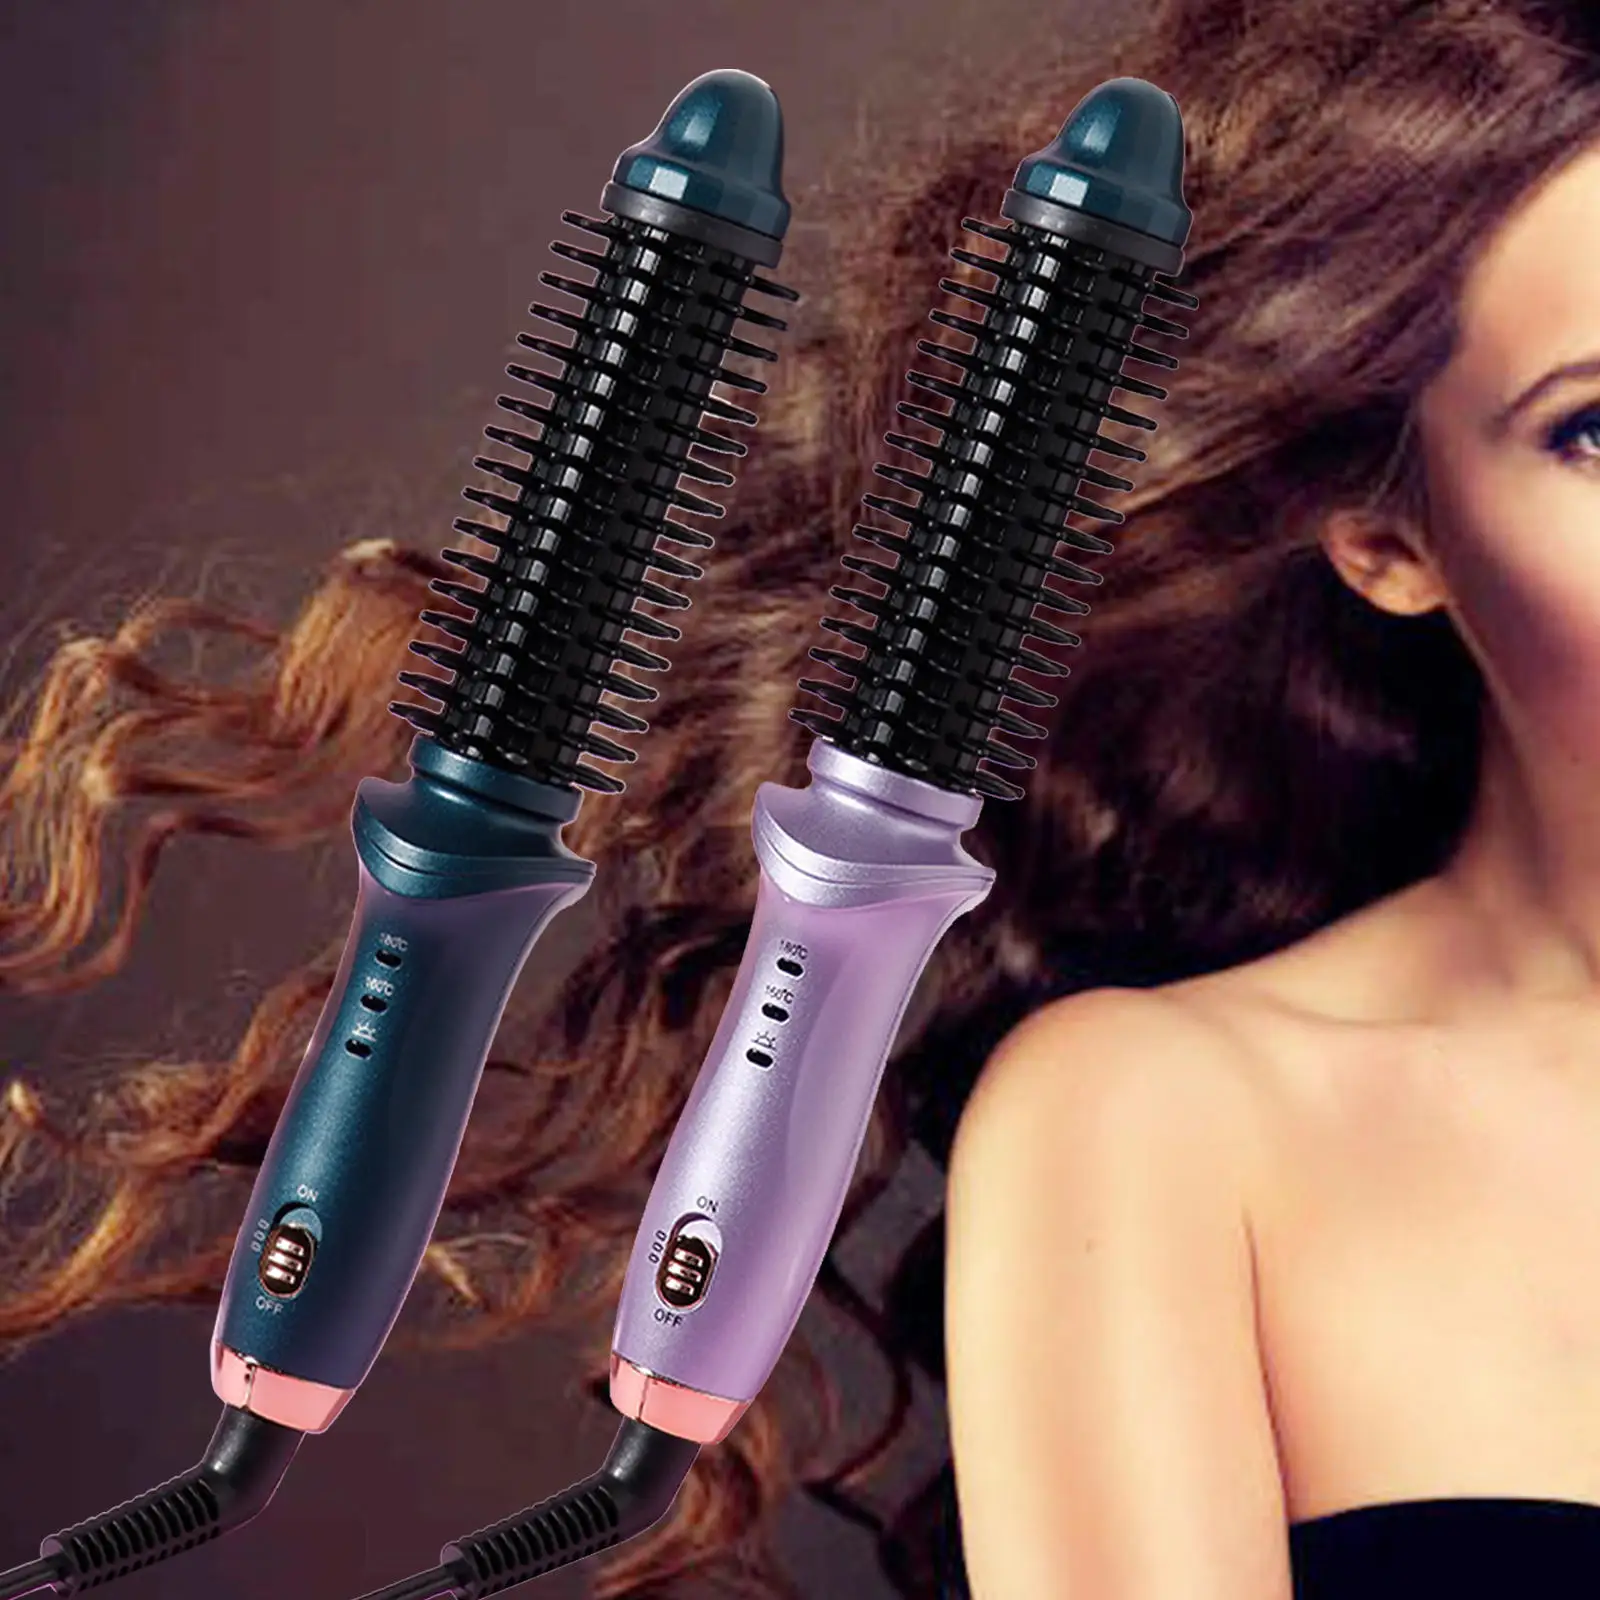 Auto Hair Curler Hair Straightener 2 Temp Fast Heating Full Automatic Pet Curling Wand for Salon Waves Curls Hair Straightening